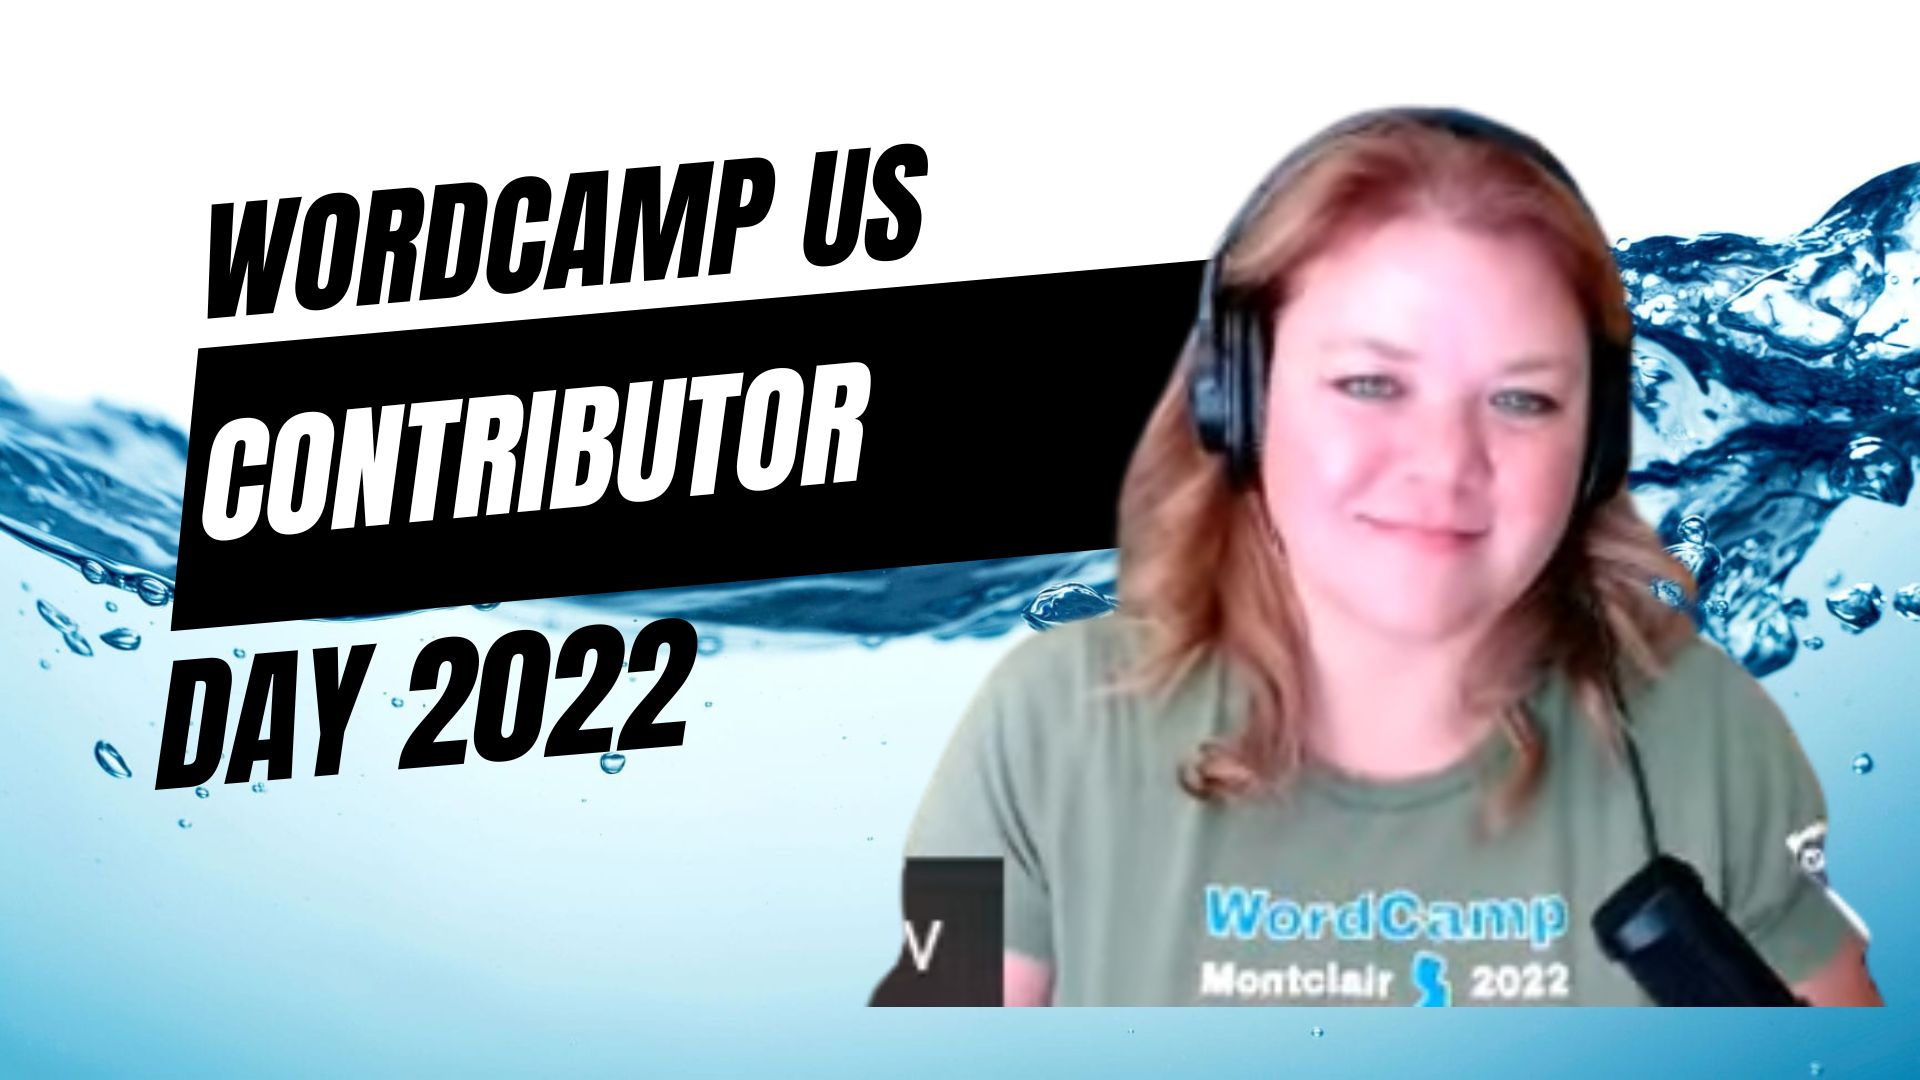 EP429 - do_action: WordCamp US 2002 Contributor Day